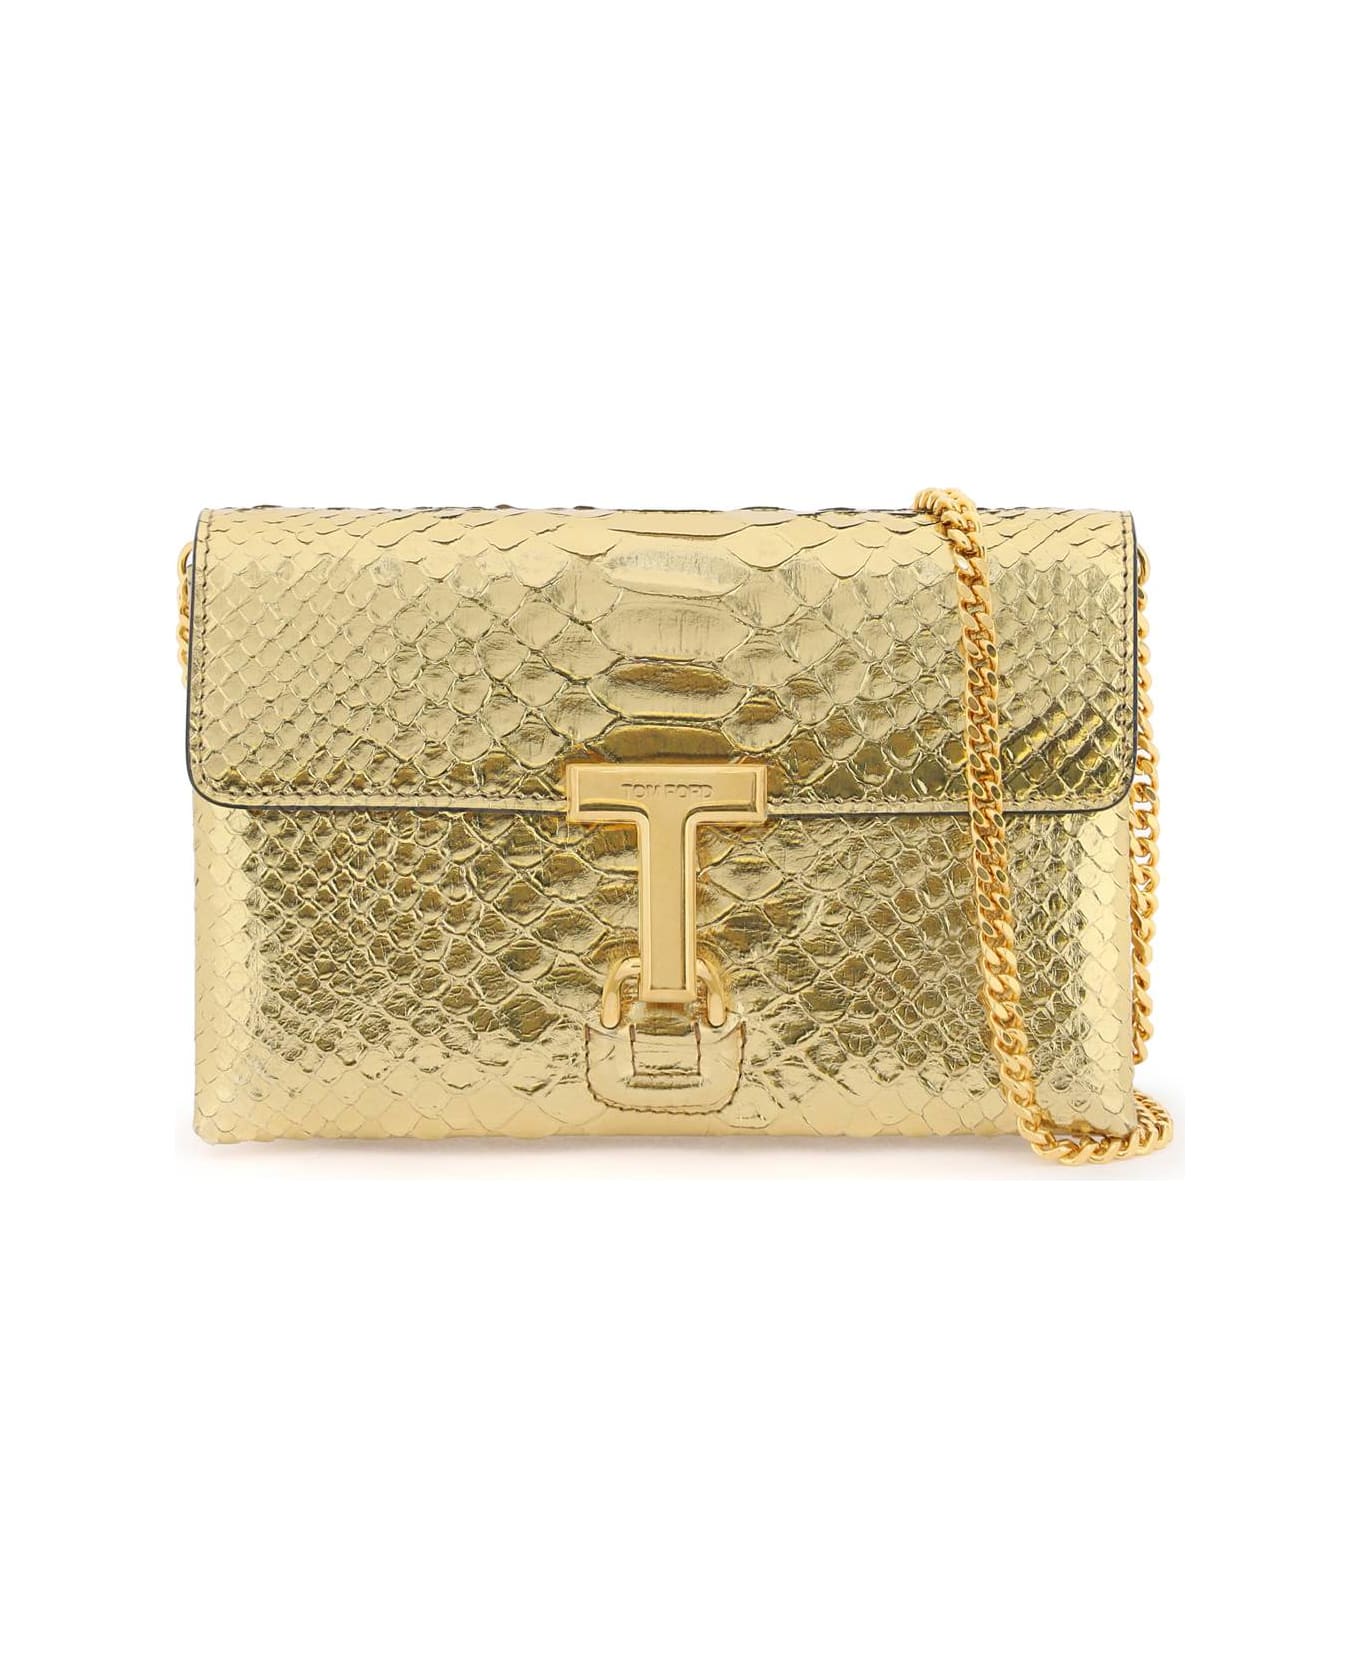 Tom Ford Croco-embossed Laminated Leather Mini Bag - DARK GOLD (Gold)